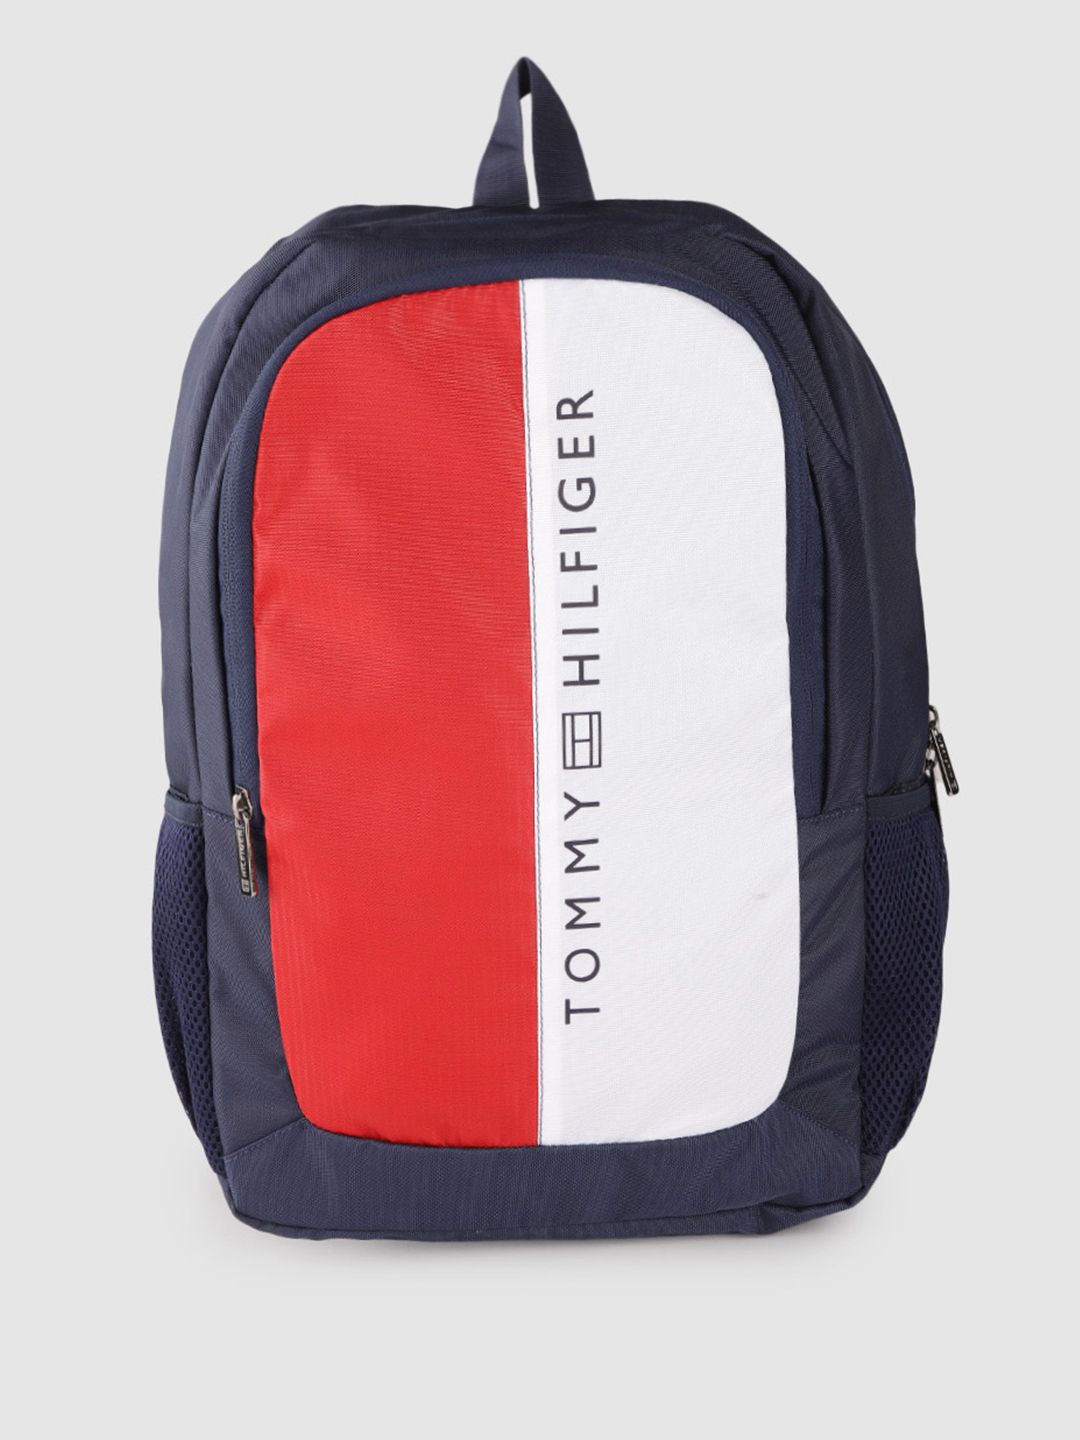 Tommy Hilfiger Unisex White & Red Colourblocked Backpack 18.4 L Price in India